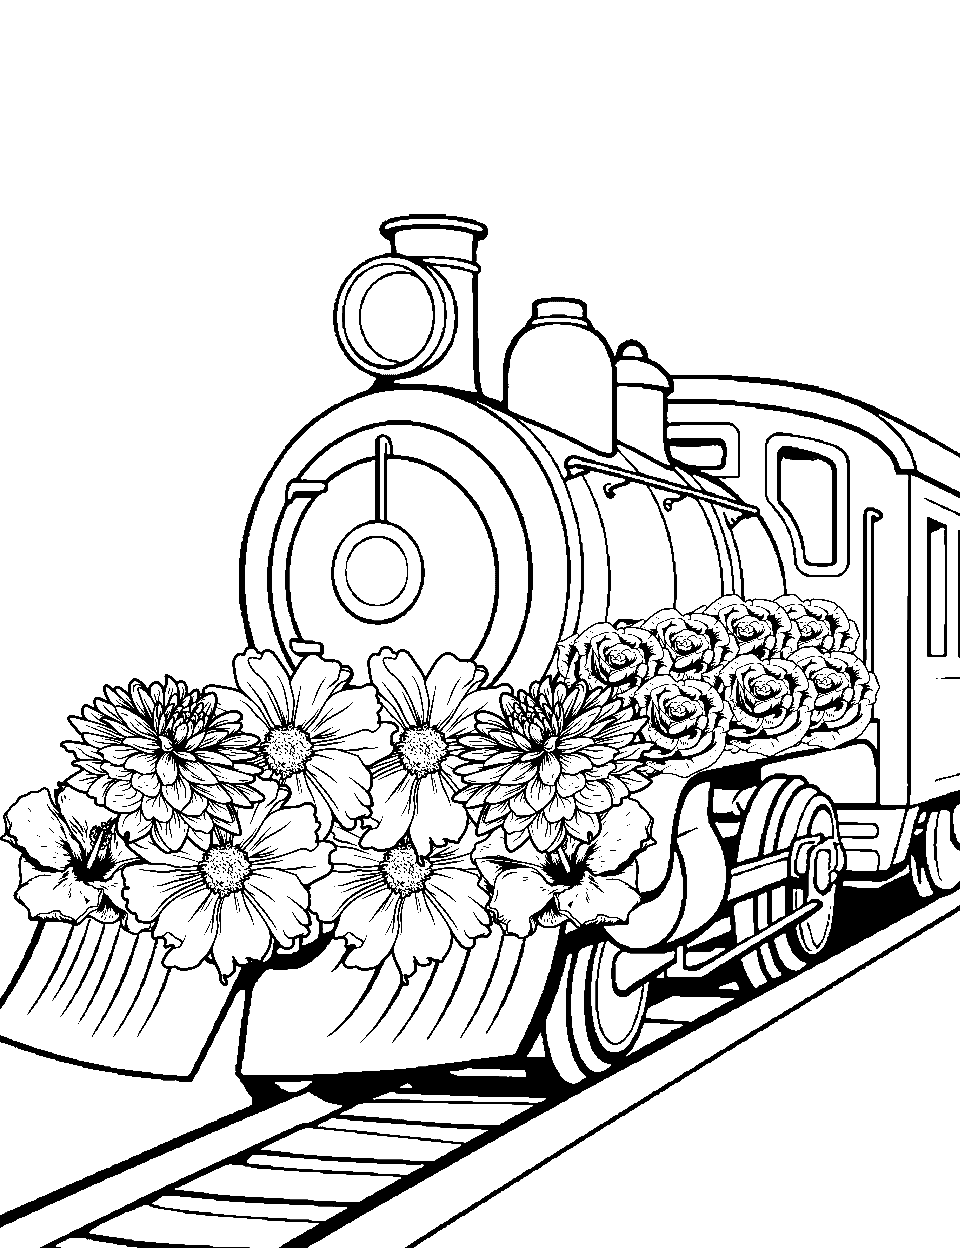 Flower-Powered Train Coloring Page - A train adorned with a variety of colorful flowers.